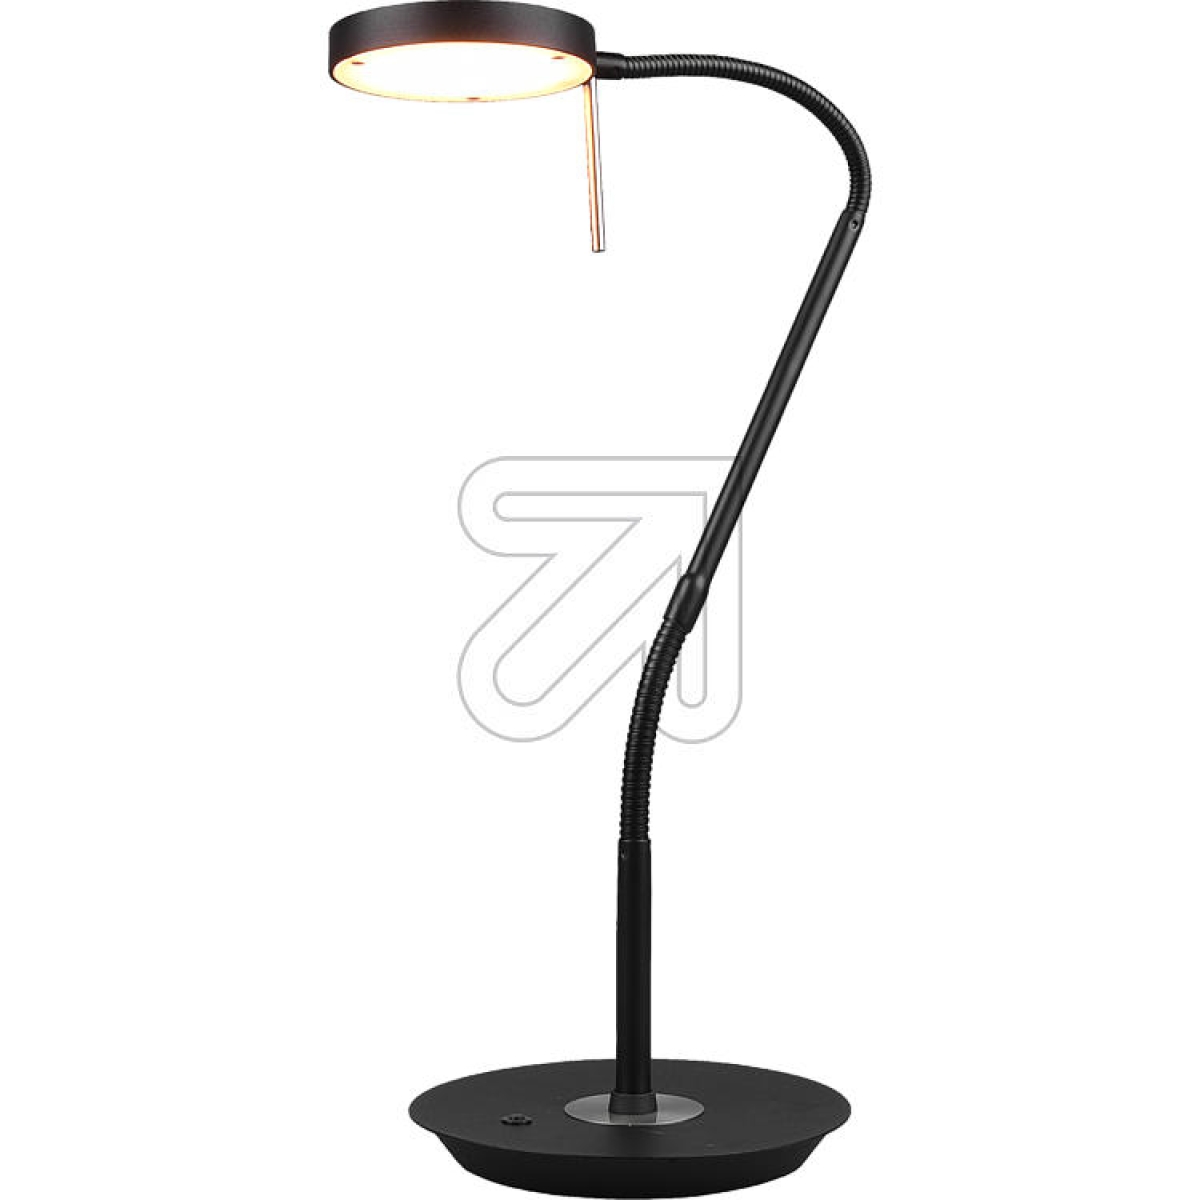 TRIOLED table lamp Monza black 12W 523310132 2300, 3000, 4000KArticle-No: 660280